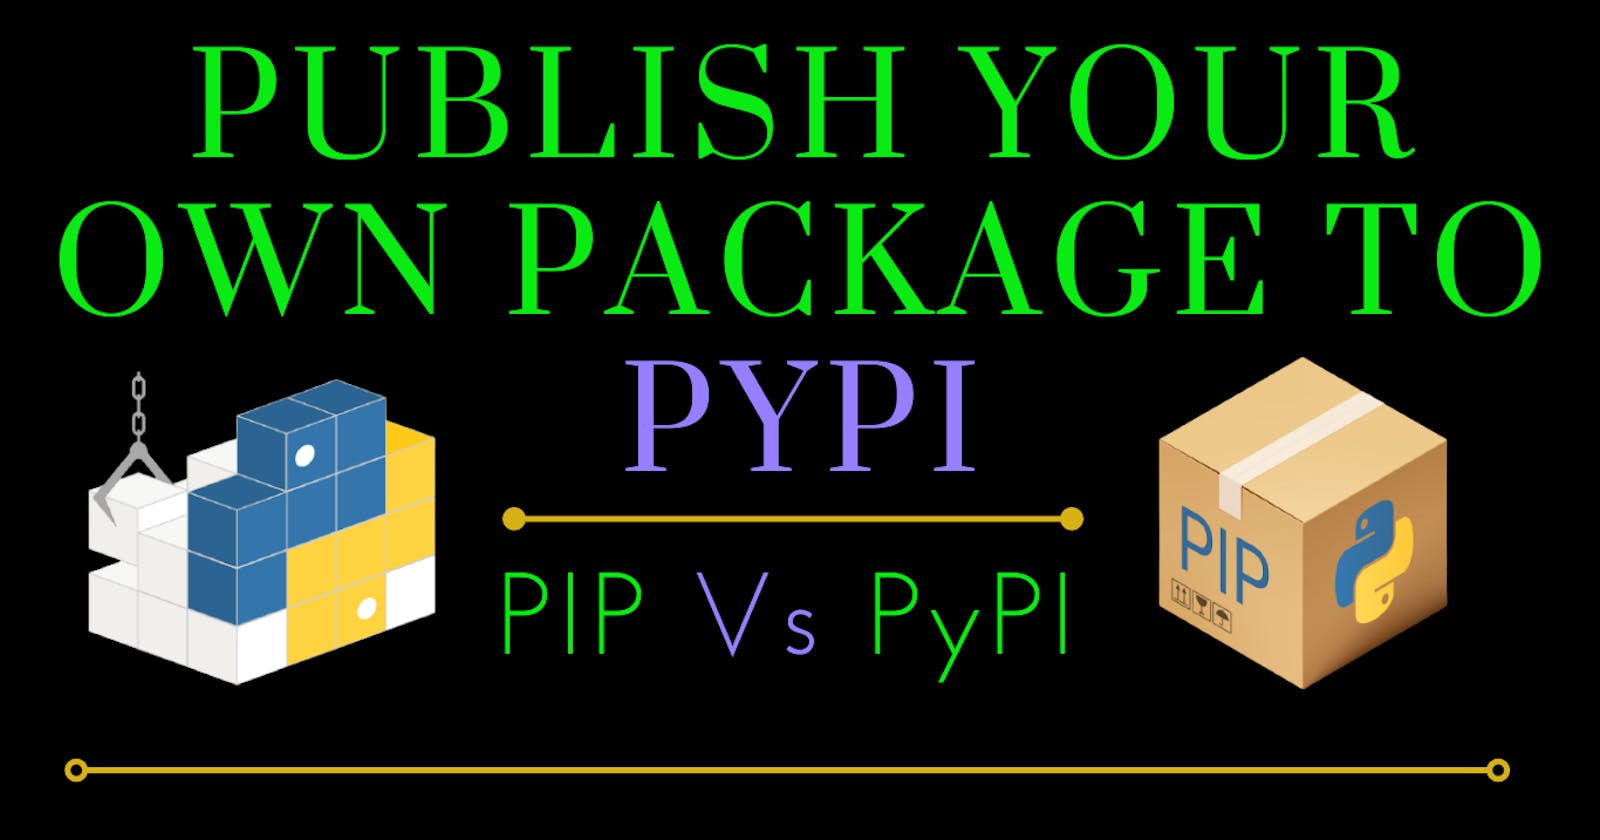 Publish Your Own Package To PyPI